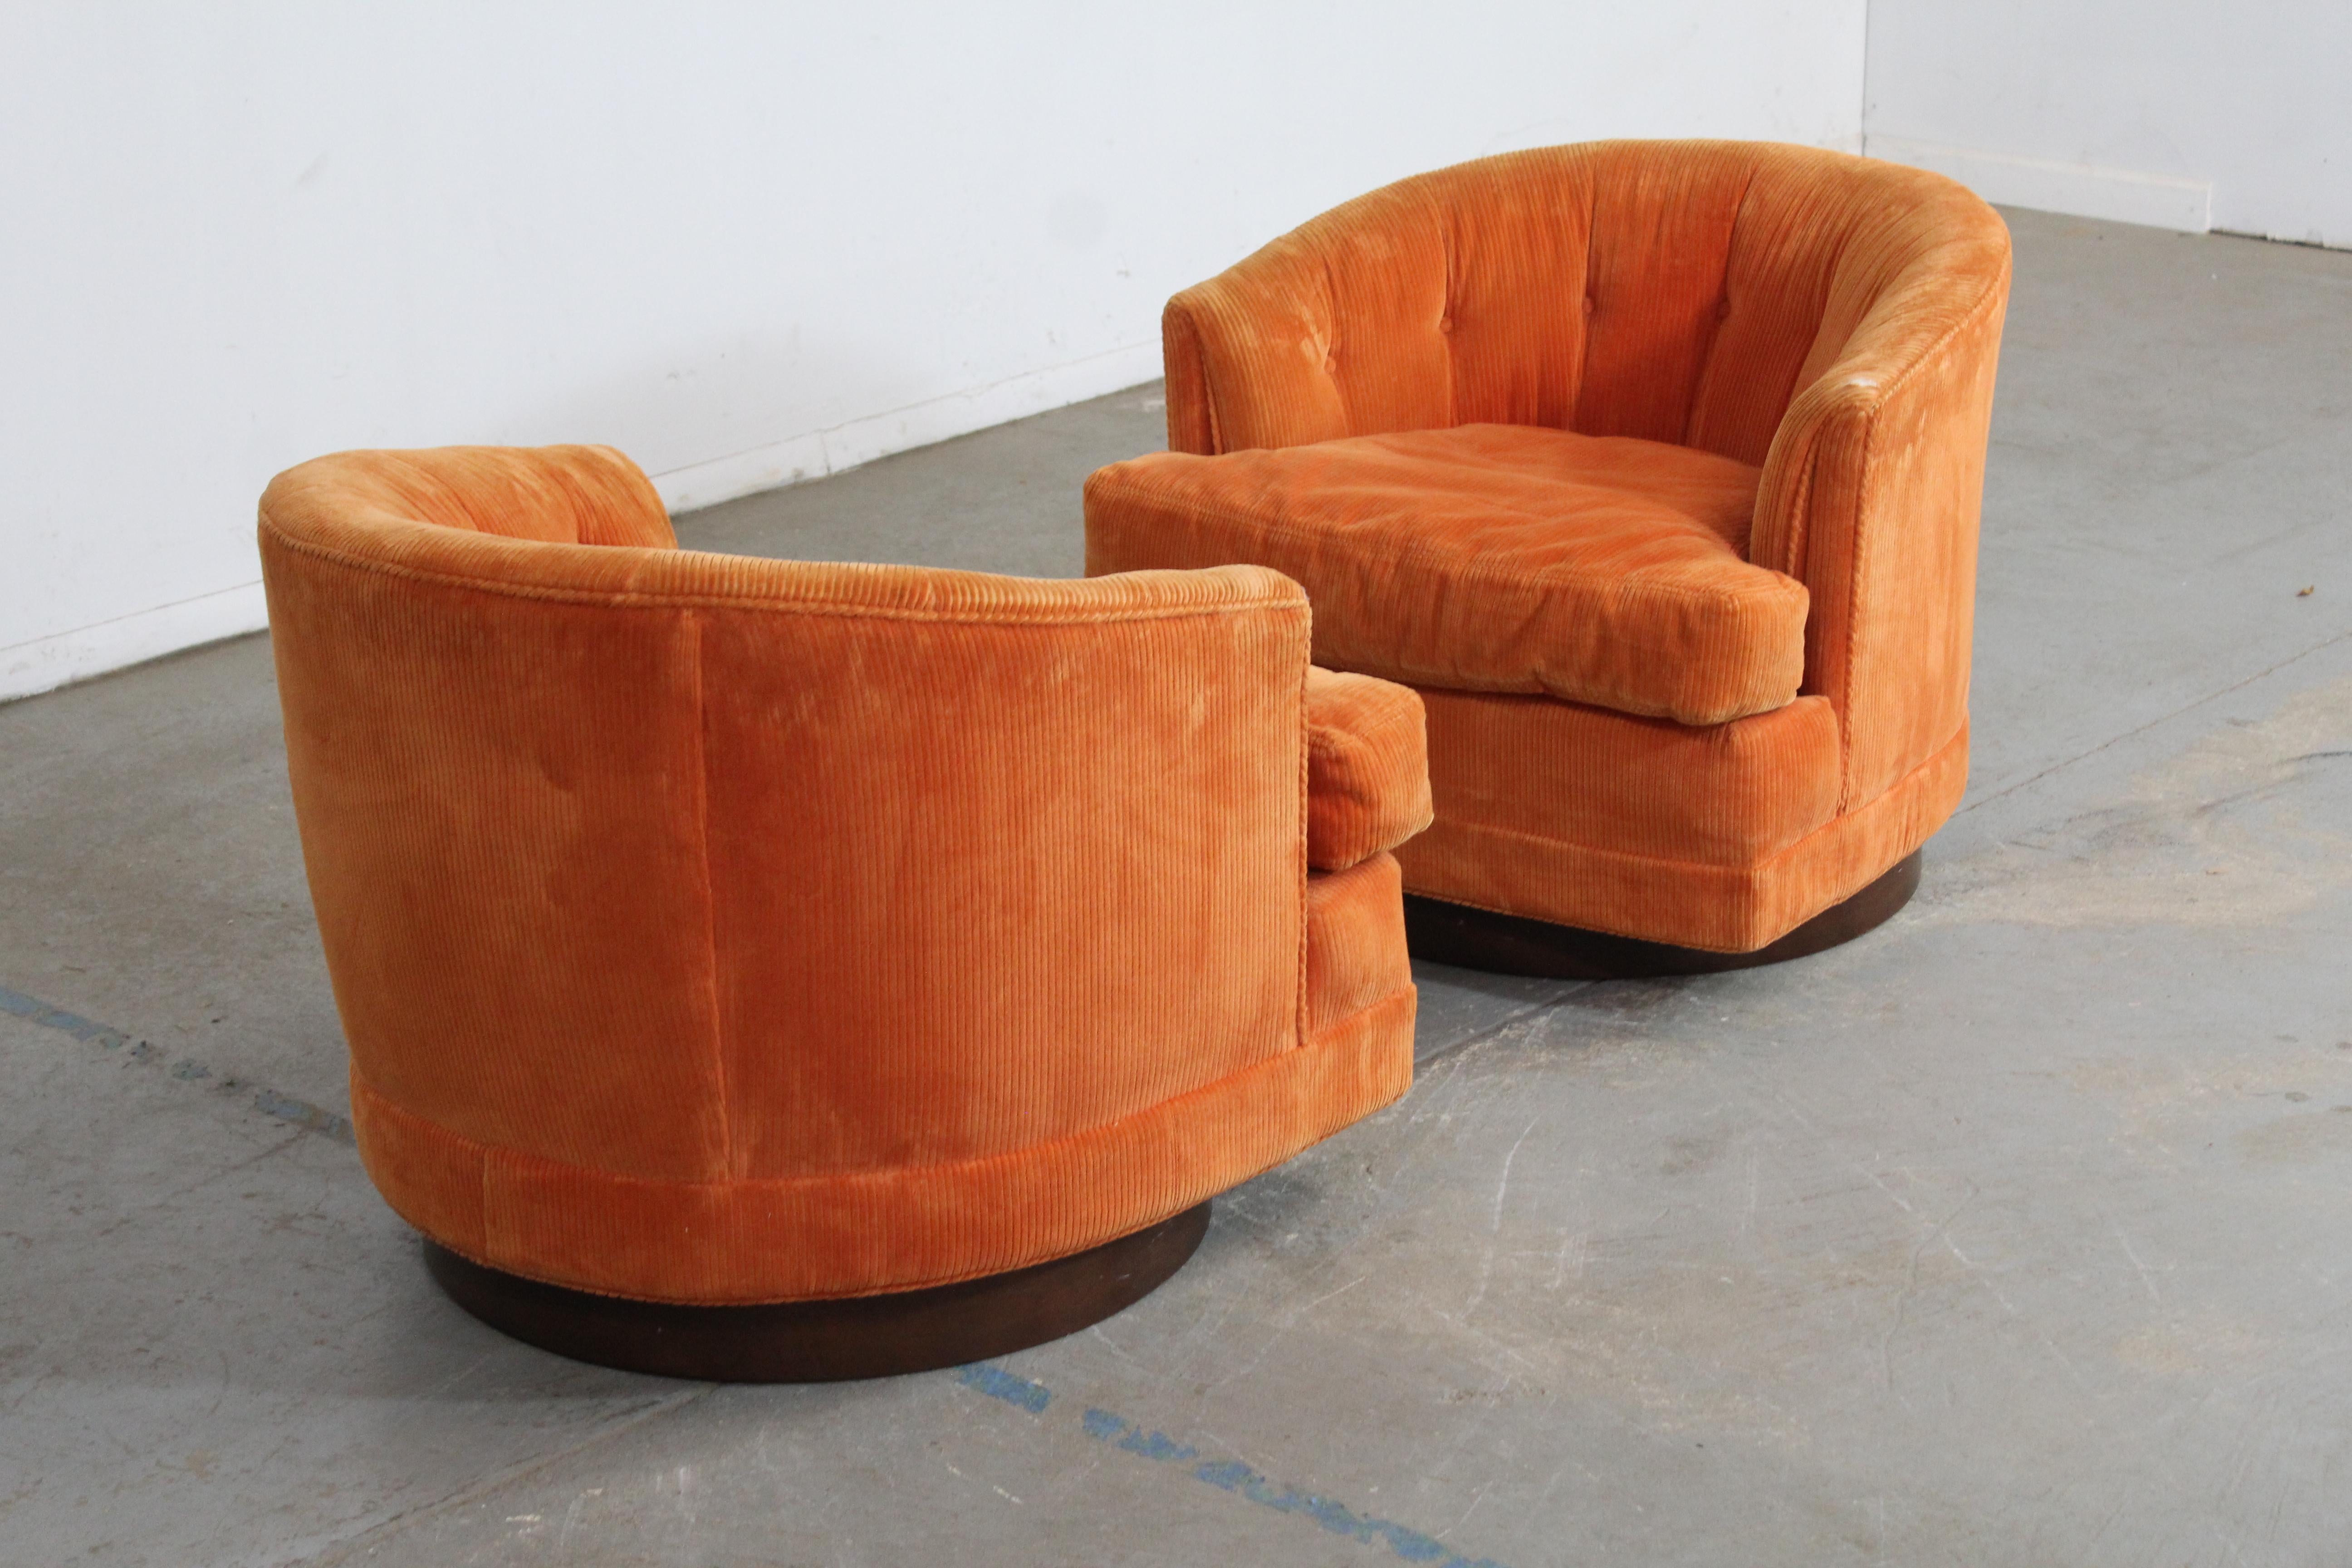 Pair of Mid-Century Modern Selig Barrel Back Swivel Club Chairs on Walnut Base For Sale 4